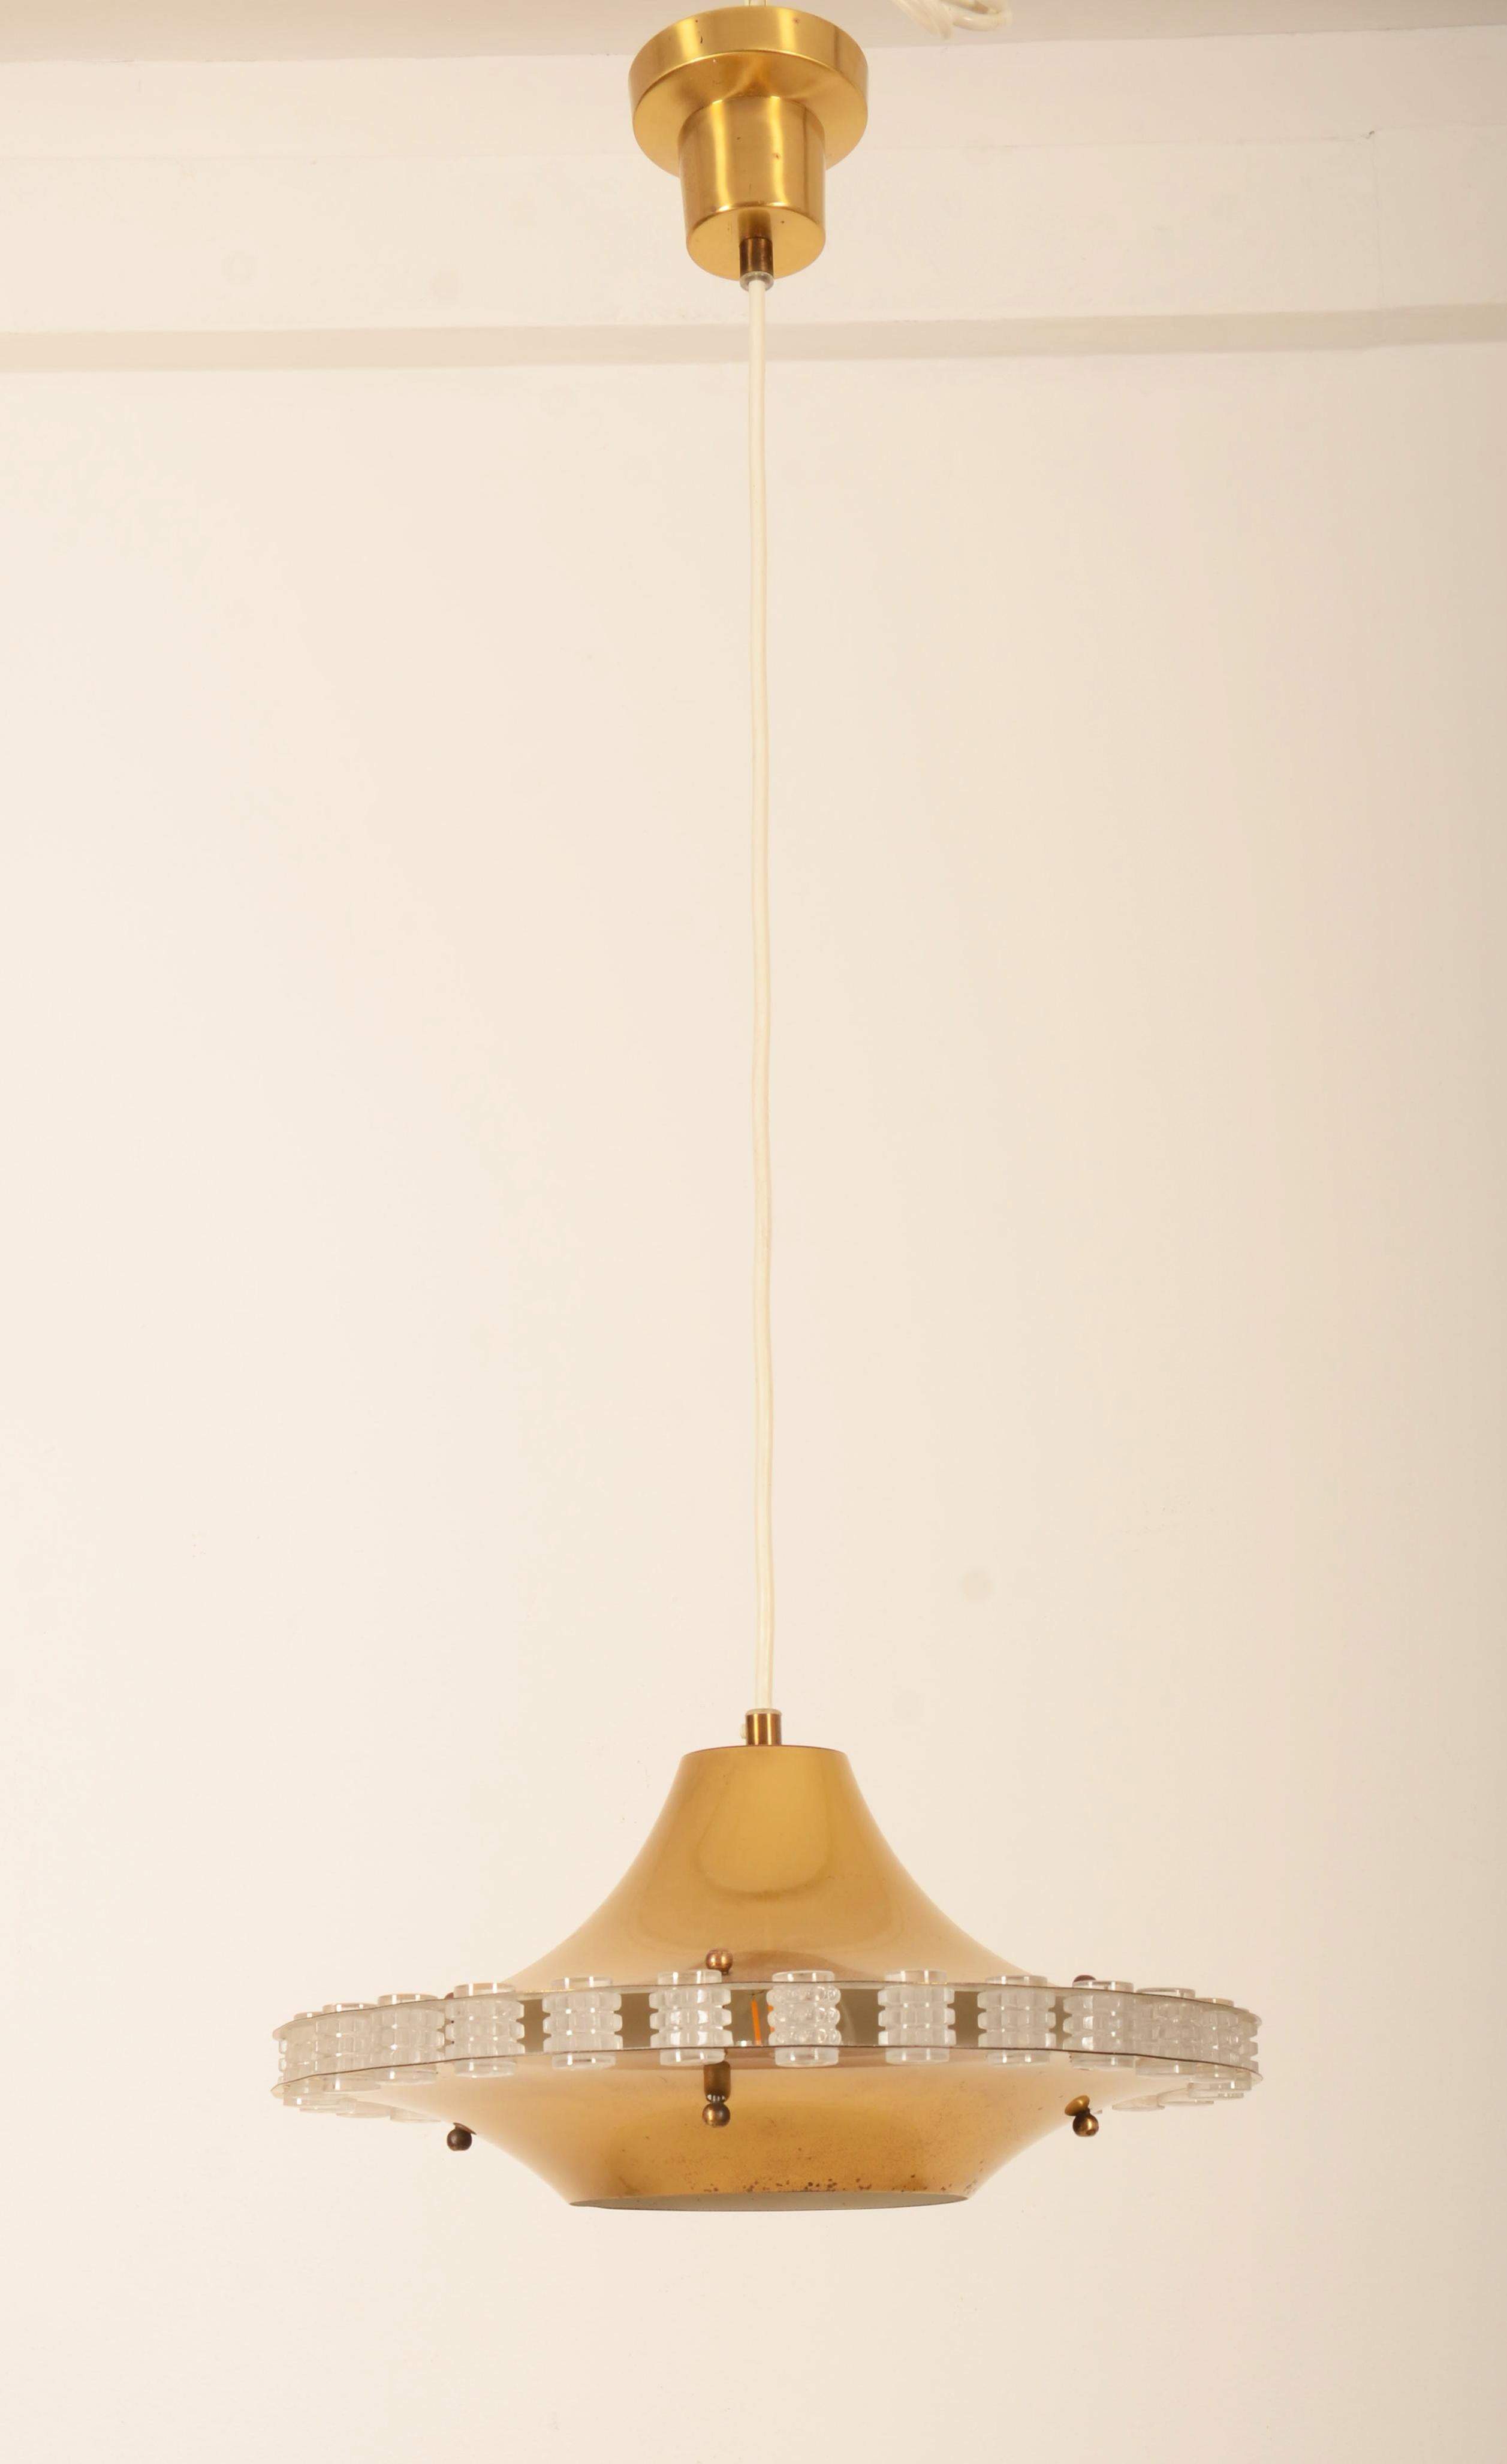 Brass ceiling lamp with openwork glass decoration. Ceiling cup with the inscription Philips.
A prototype was reportedly developed for Ateljé Lyktan, but it did not enter production.
Dimensions lamp only: Ø 35 cm, height 18 cm.